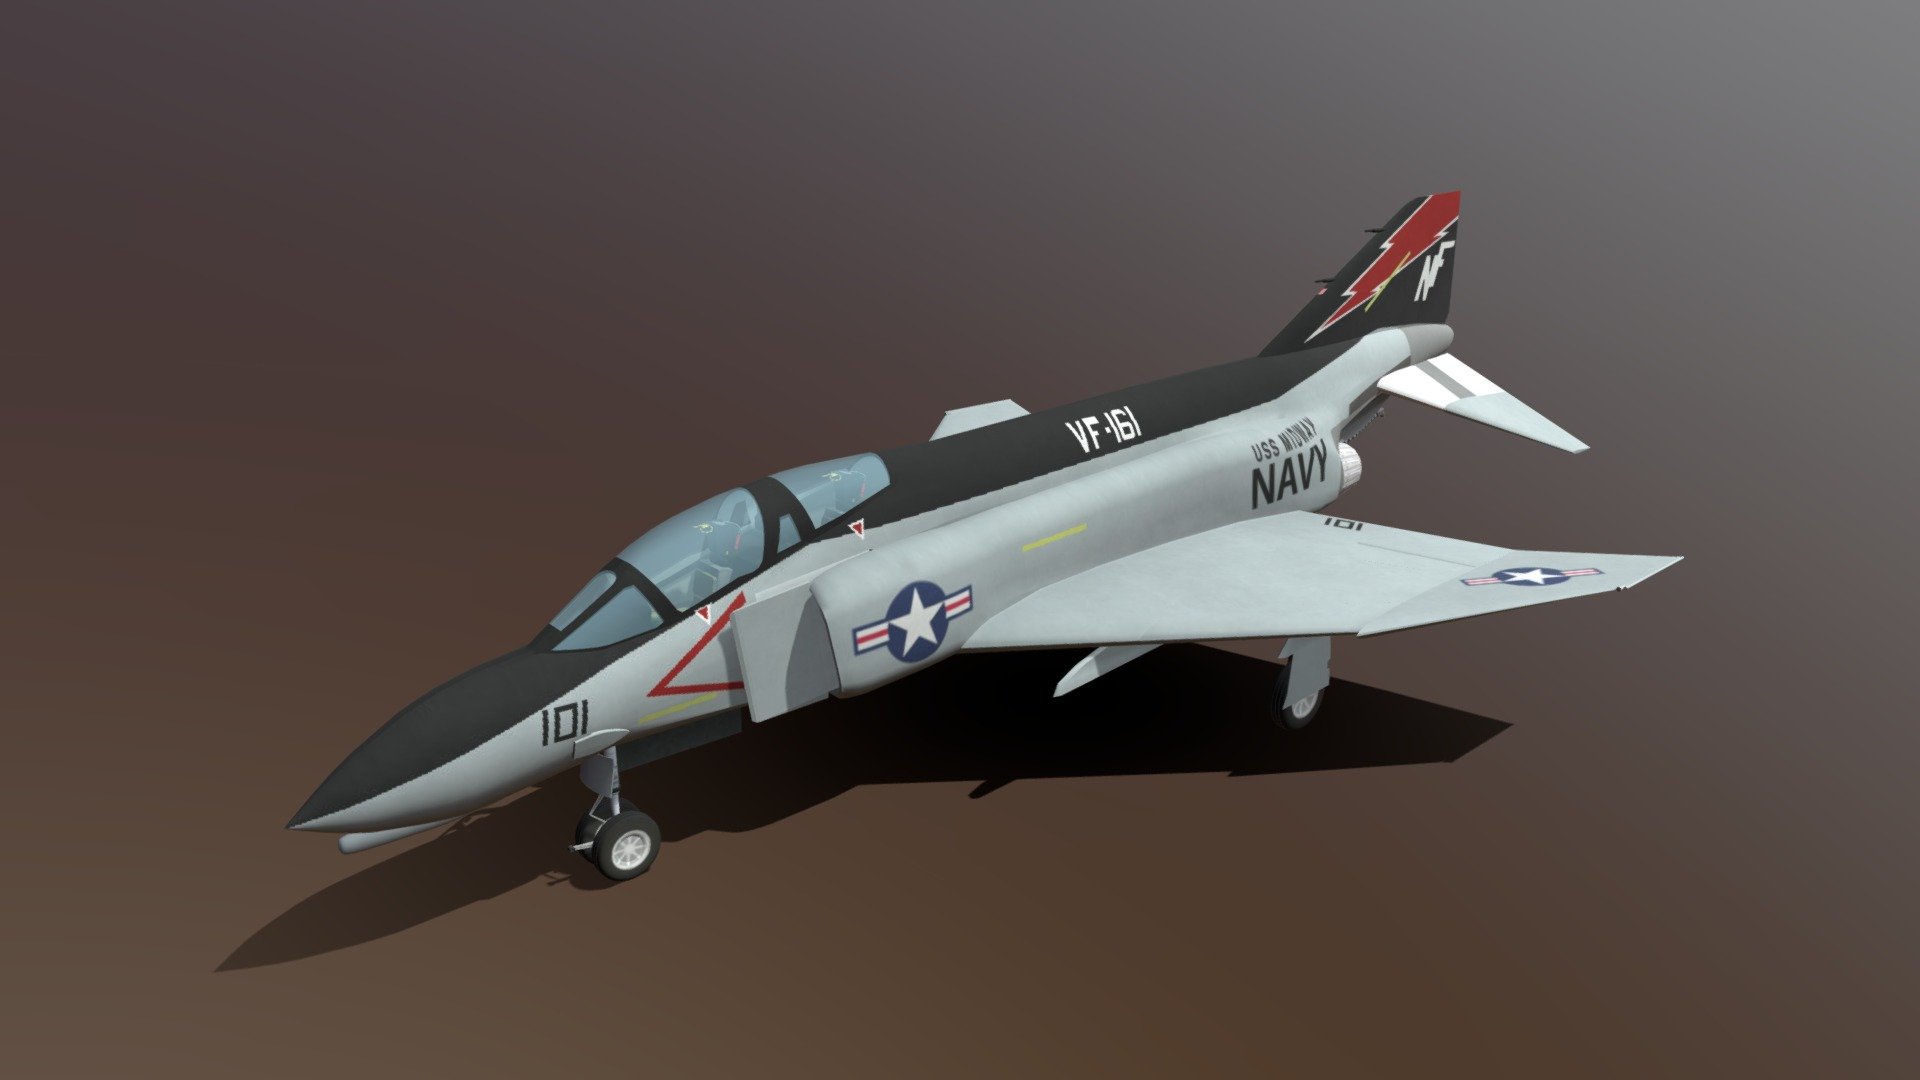 The F-4 was used extensively during the Vietnam War. It served as the principal air superiority fighter for the U.S. Air Force, Navy, and Marine Corps and became important in the ground-attack and aerial reconnaissance roles late in the war. During the Vietnam War, one U.S. Air Force pilot, two weapon systems officers (WSOs), one U.S. Navy pilot and one radar intercept officer (RIO) became aces by achieving five aerial kills against enemy fighter aircraft. (sources wikipedia) - McDonnell Douglas F-4 Phantom - Download Free 3D model by helijah 3d model